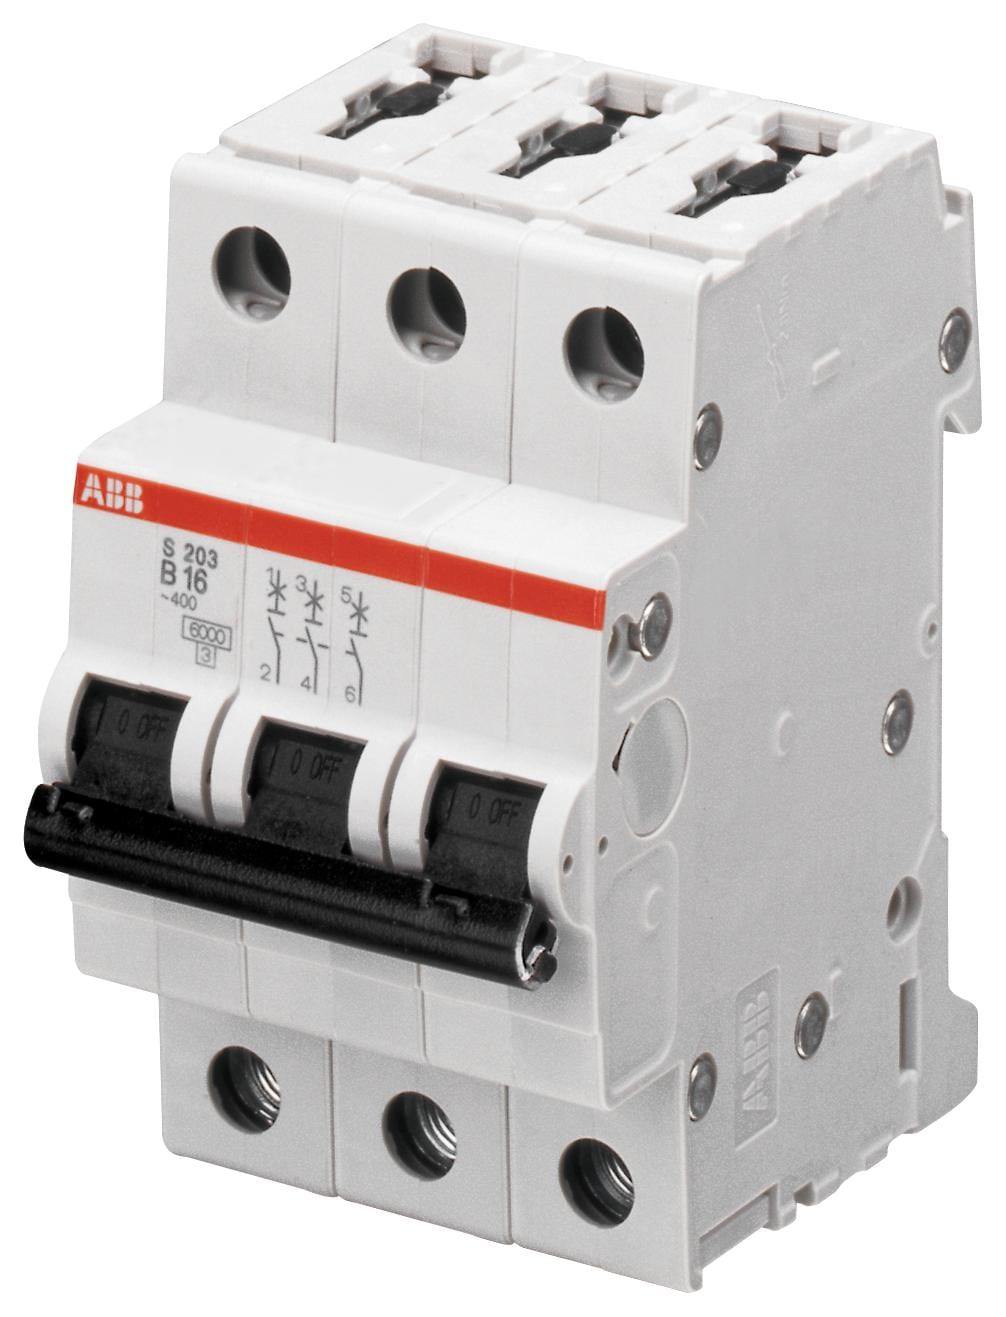 ABB Thermal Magnetic S203M-D20 CIRCUIT BREAKER, THERMAL MAG, 3 POLE ABB 2501406 S203M-D20